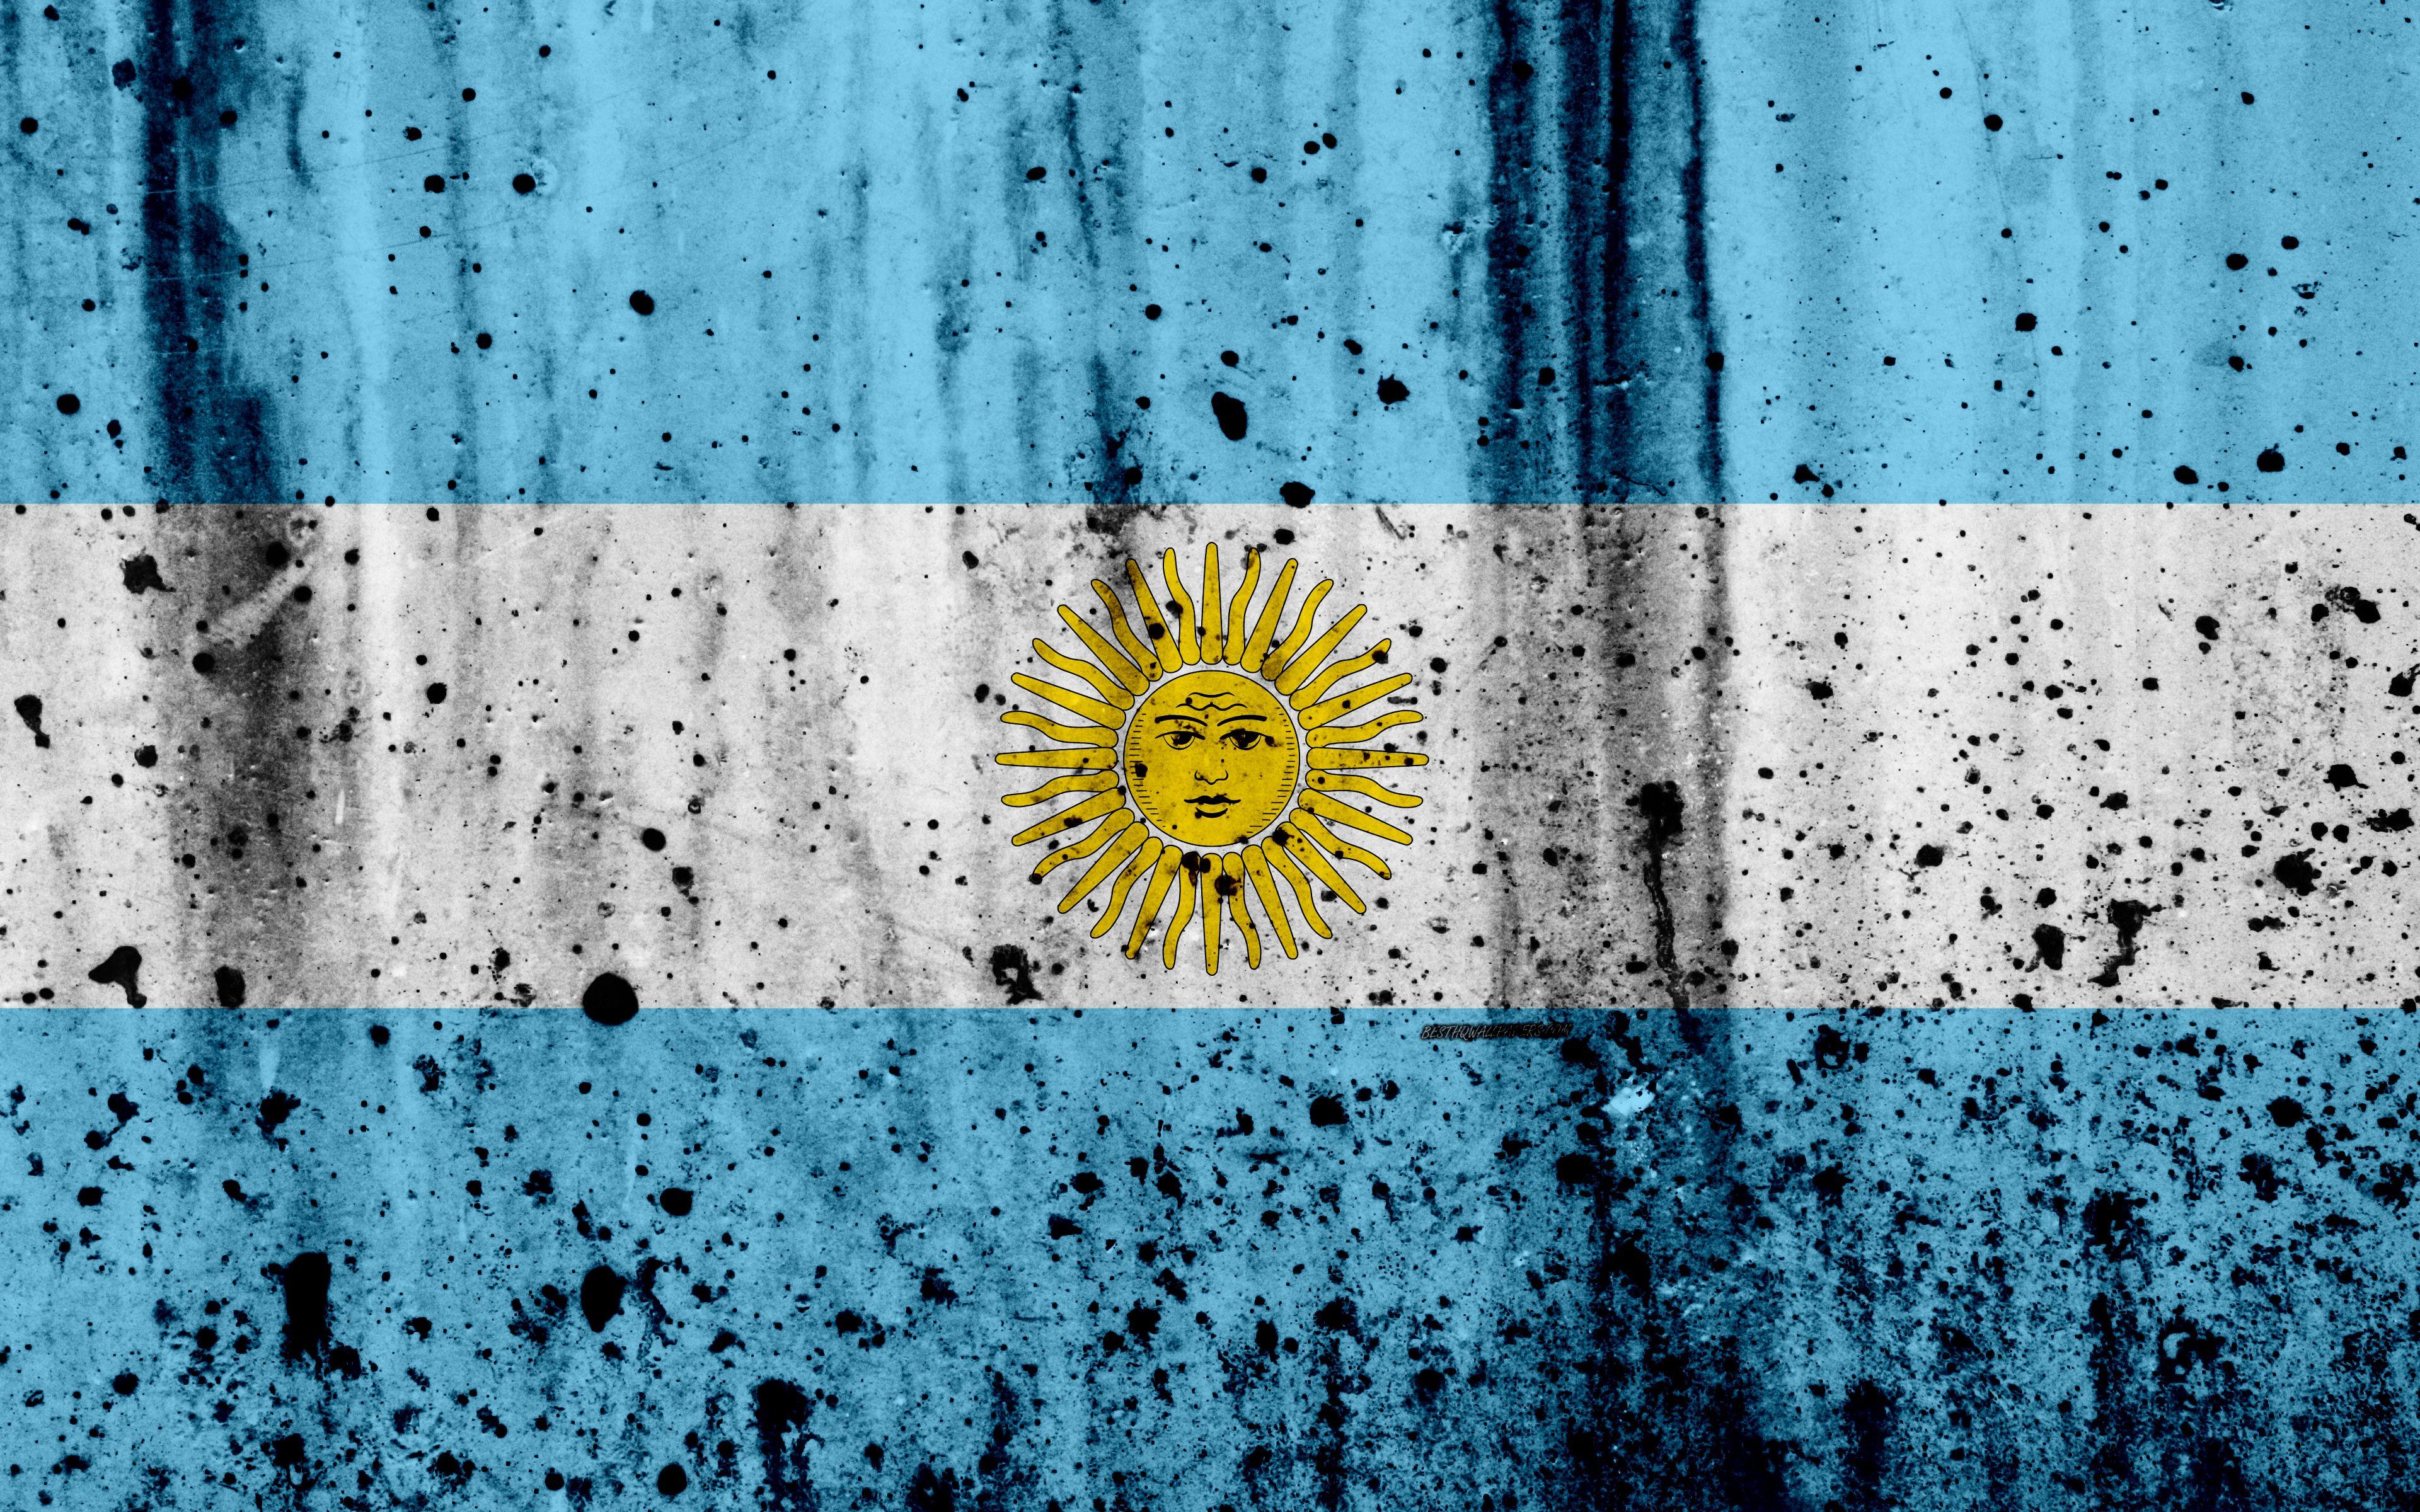 Argentina Flag Wallpapers Top Free Argentina Flag Backgrounds Wallpaperaccess